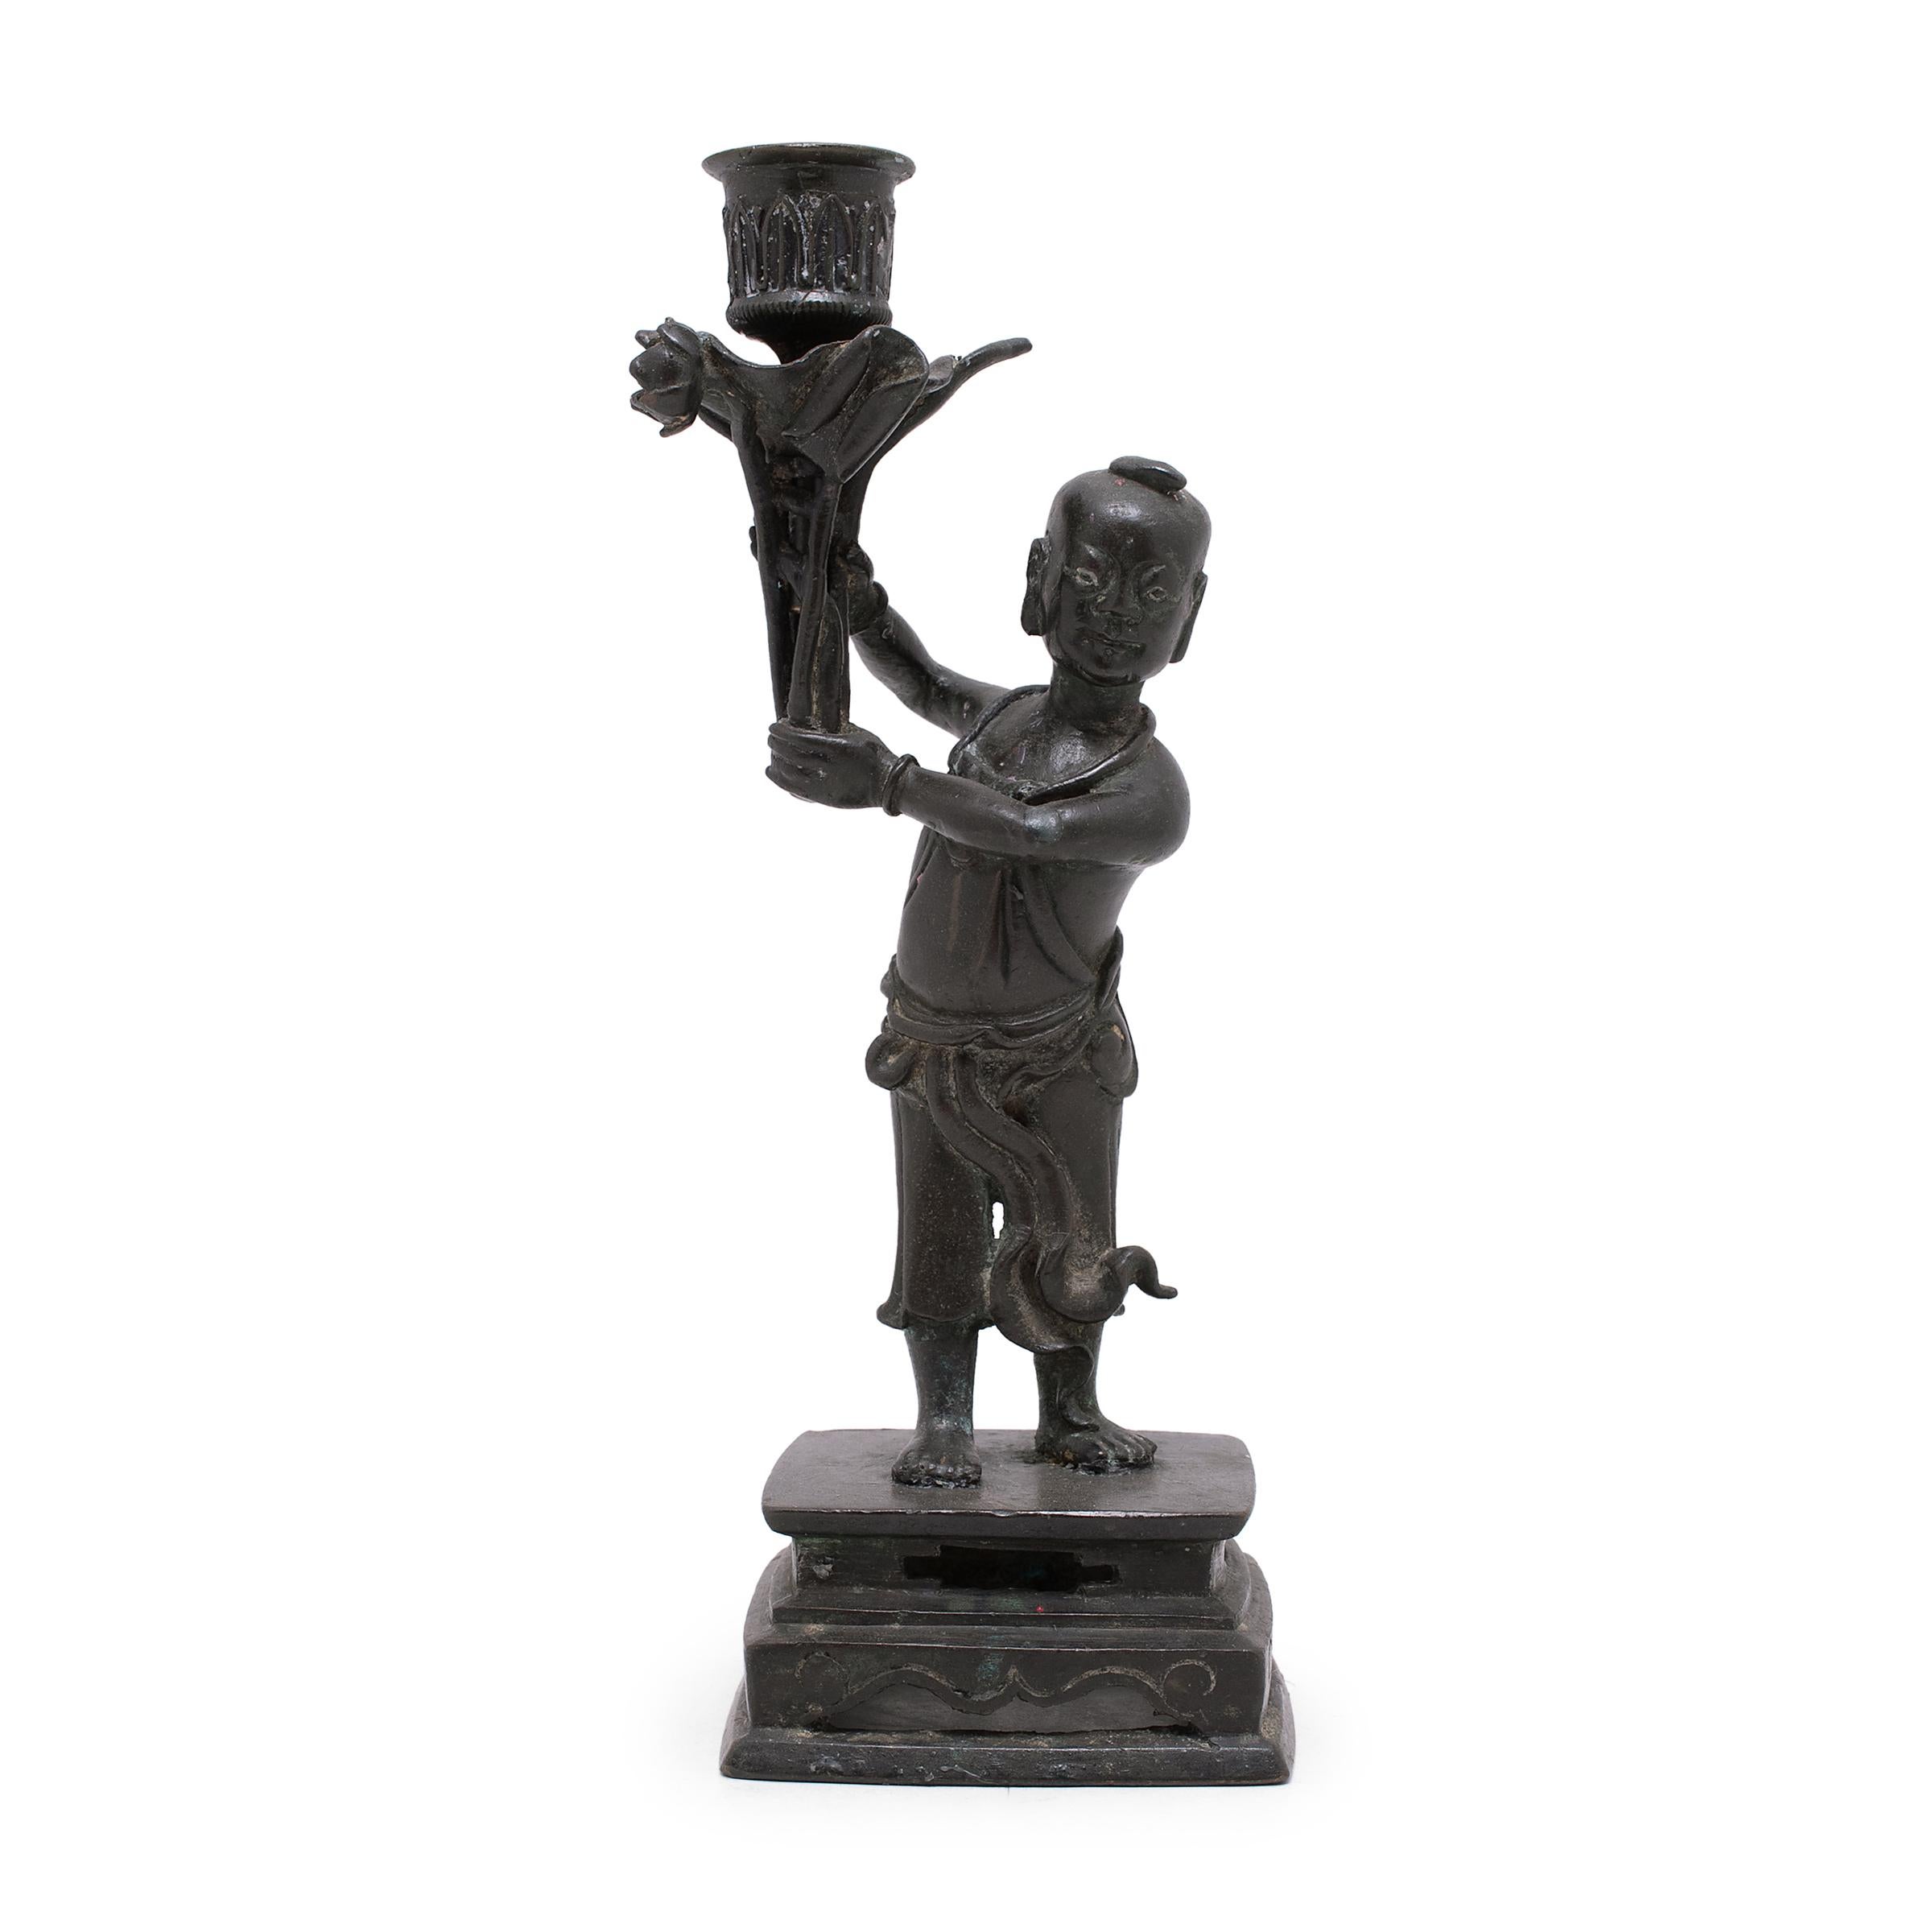 These early 20th century candlesticks are cast of bronze in the form of two young boys dressed in flowing garments and standing on square pedestal bases. Each boy holds a dish for taper candles overhead, tucked within a cluster of lotus leaves,